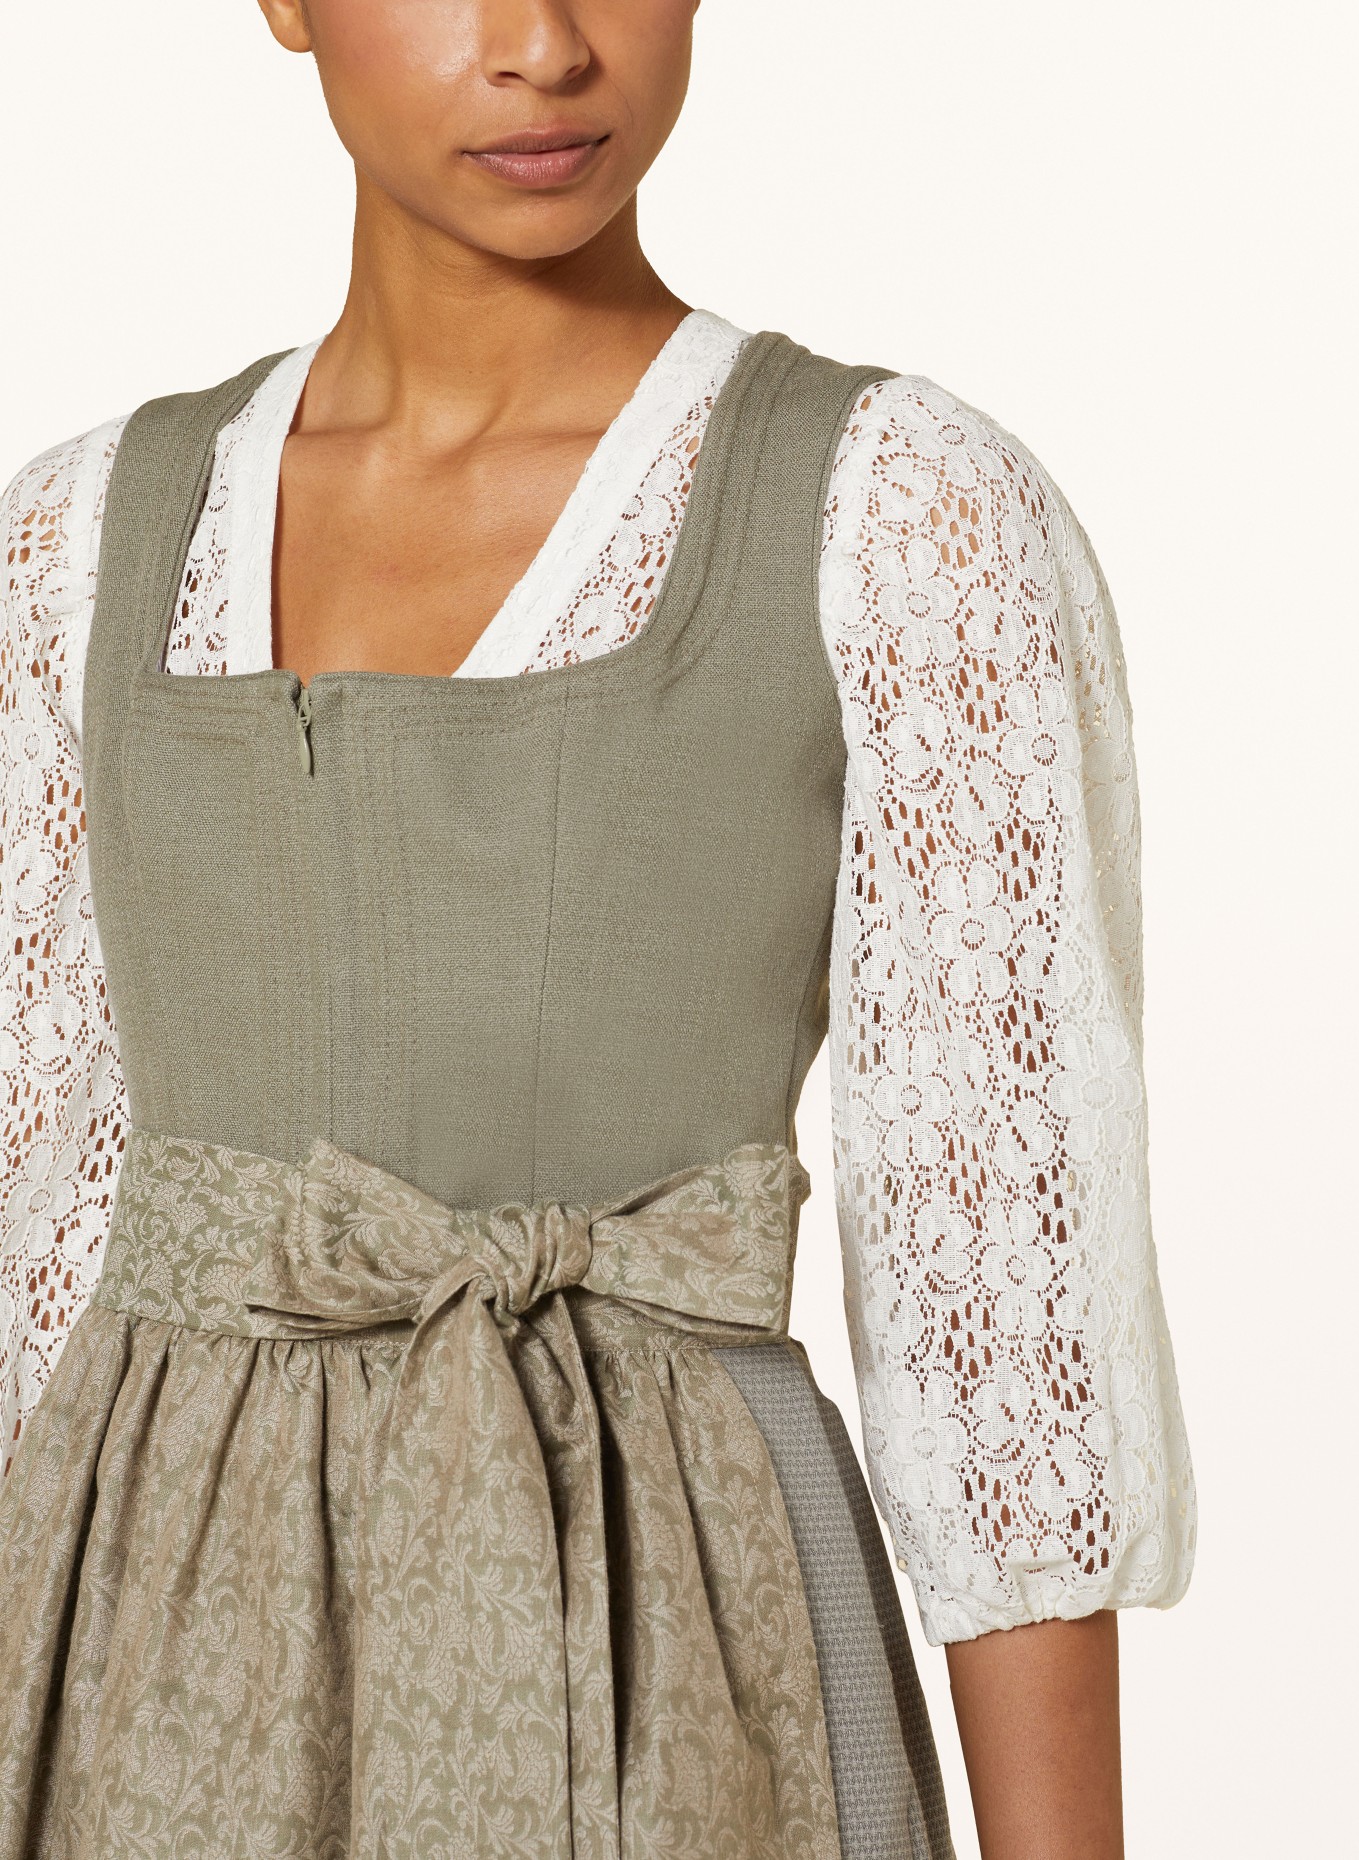 LIMBERRY Dirndl blouse AURORA in lace with 3/4 sleeves, Color: WHITE (Image 3)